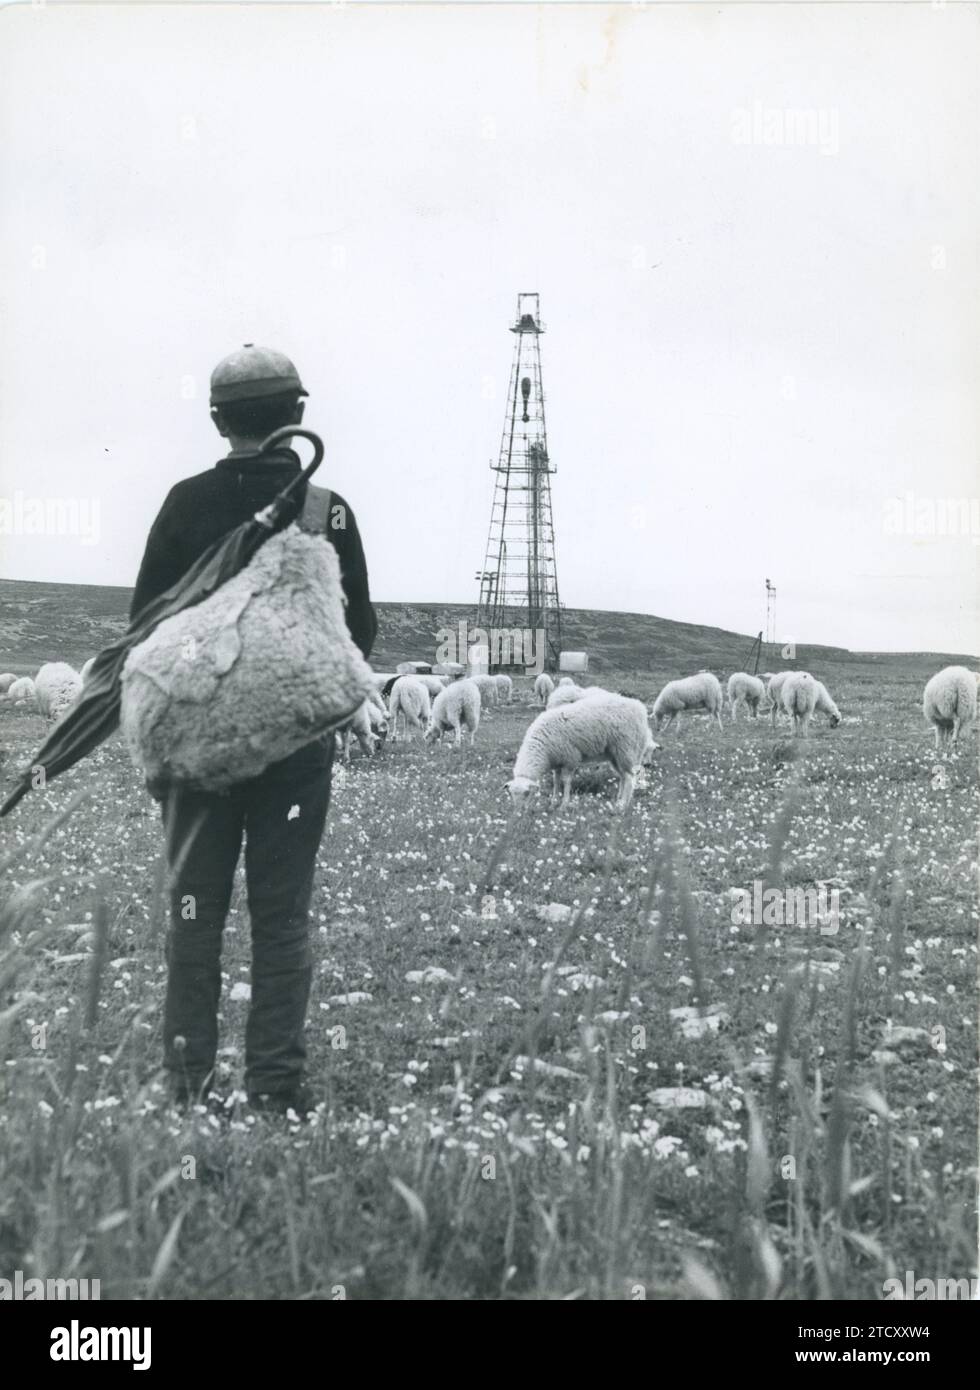 Valdeajos. The dream of black gold. On June 6, 1964, the discovery of an oil field in the Páramo de La Lora in Burgos was announced. In the image, a shepherd boy watches as the extraction tower rises. Credit: Album / Archivo ABC Stock Photo